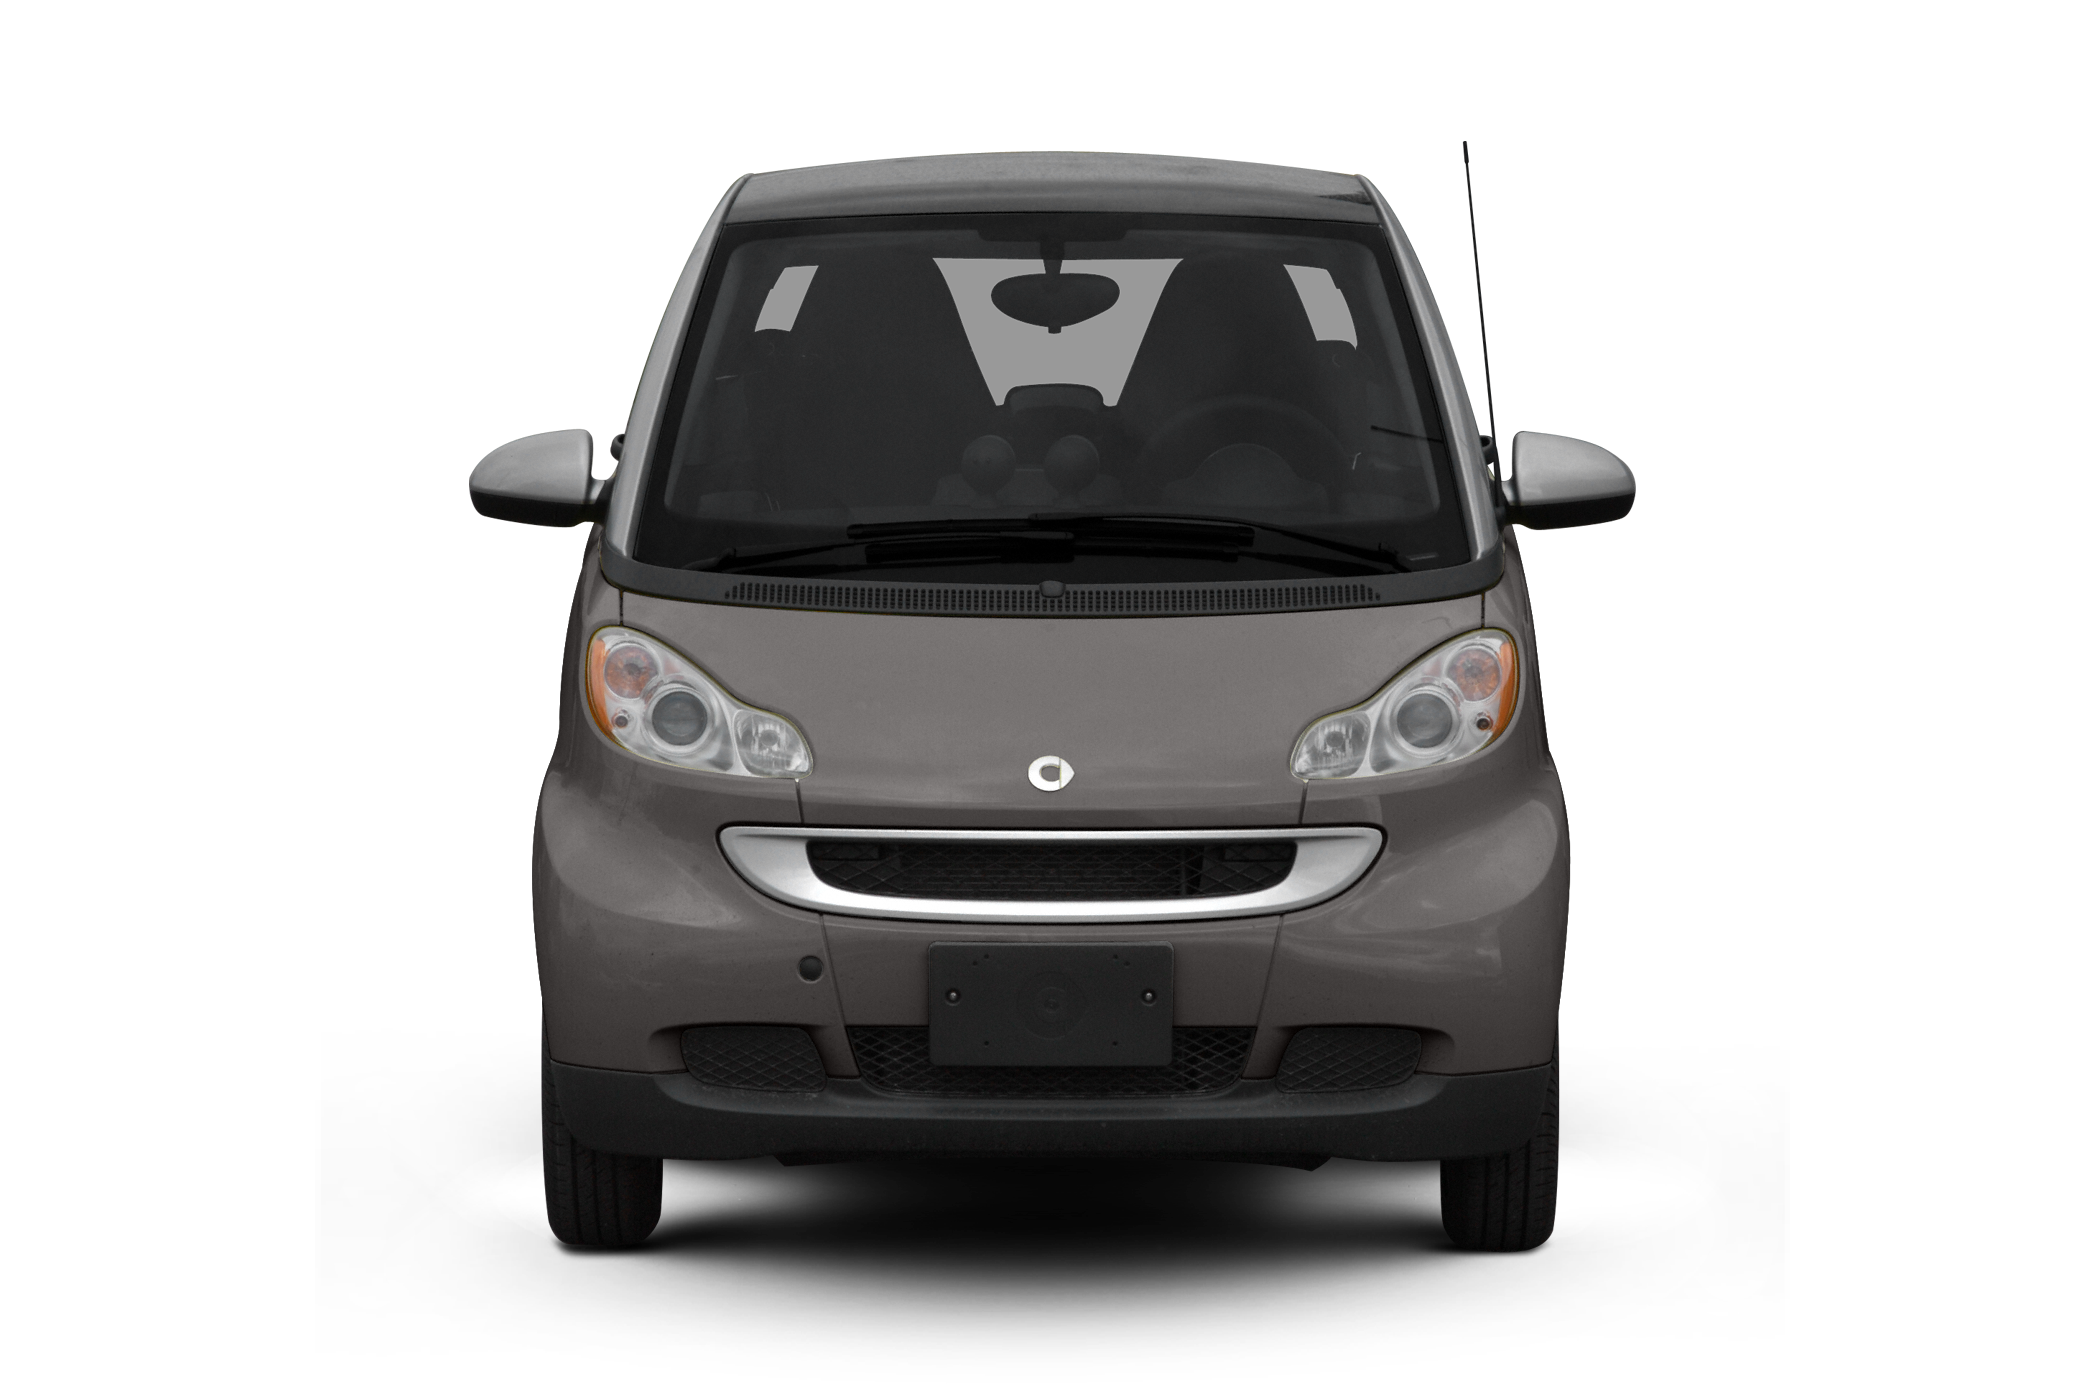 2009 smart ForTwo